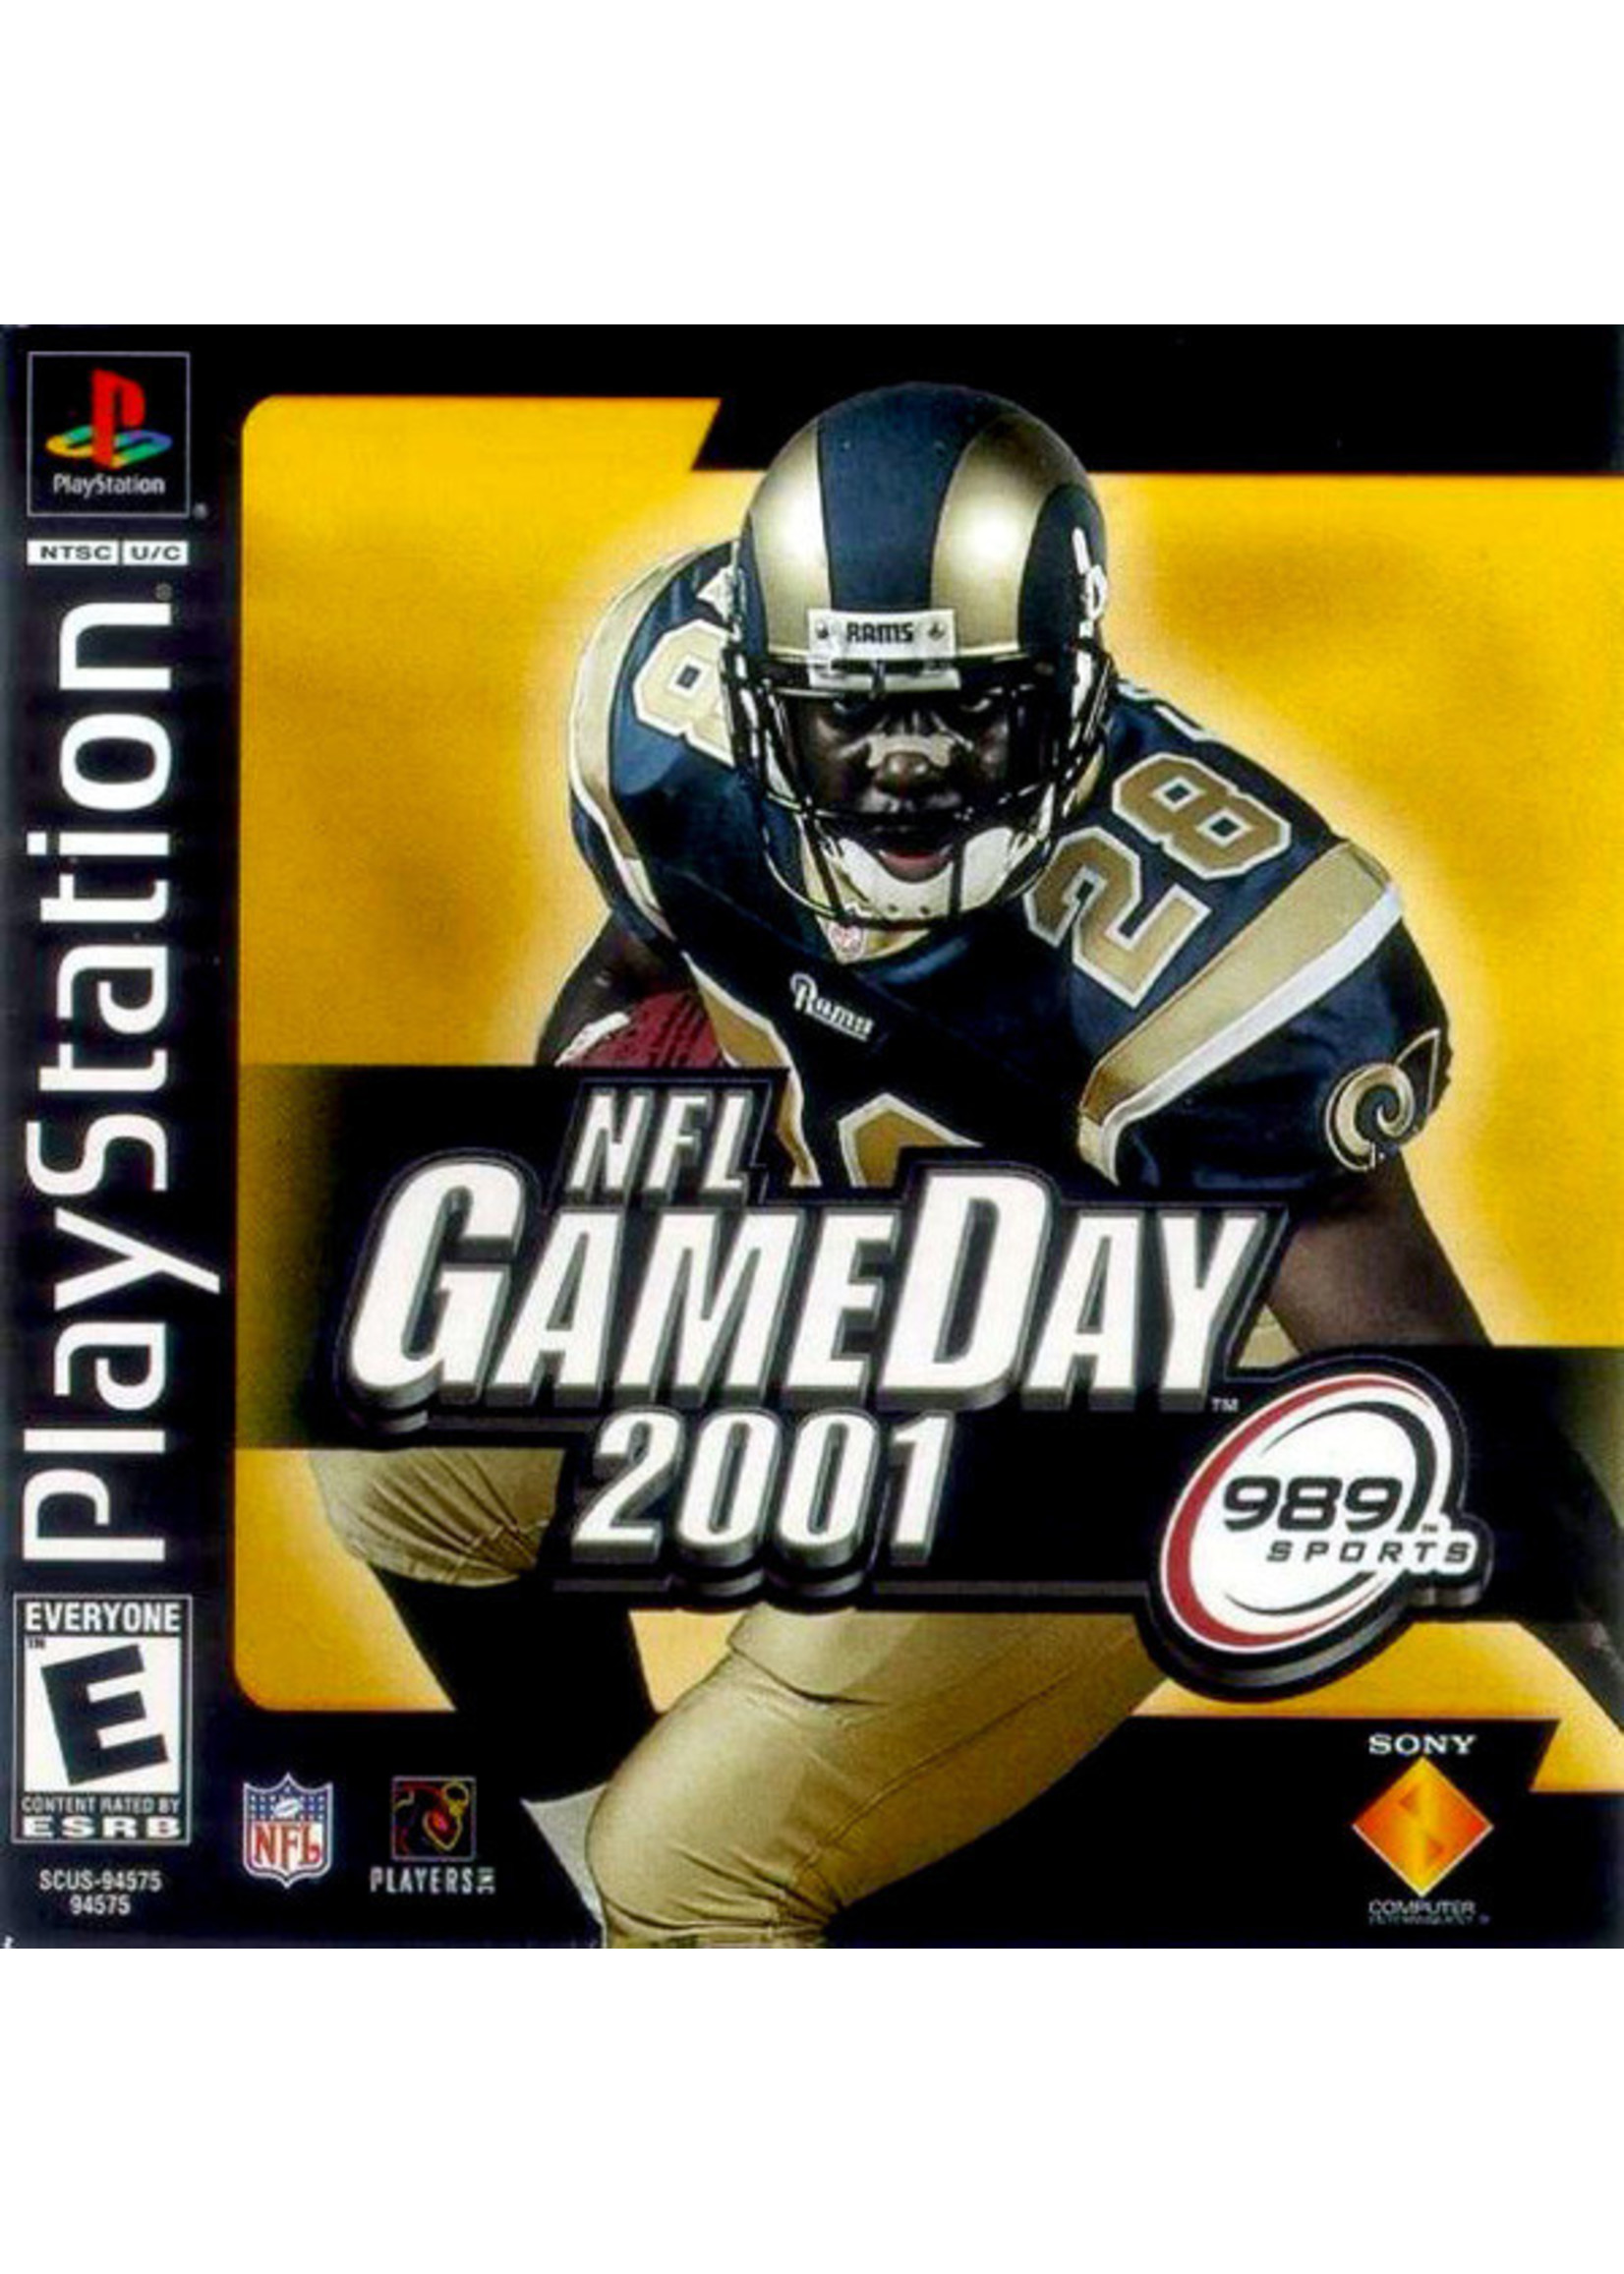 Sony Playstation 1 (PS1) NFL GameDay 2001